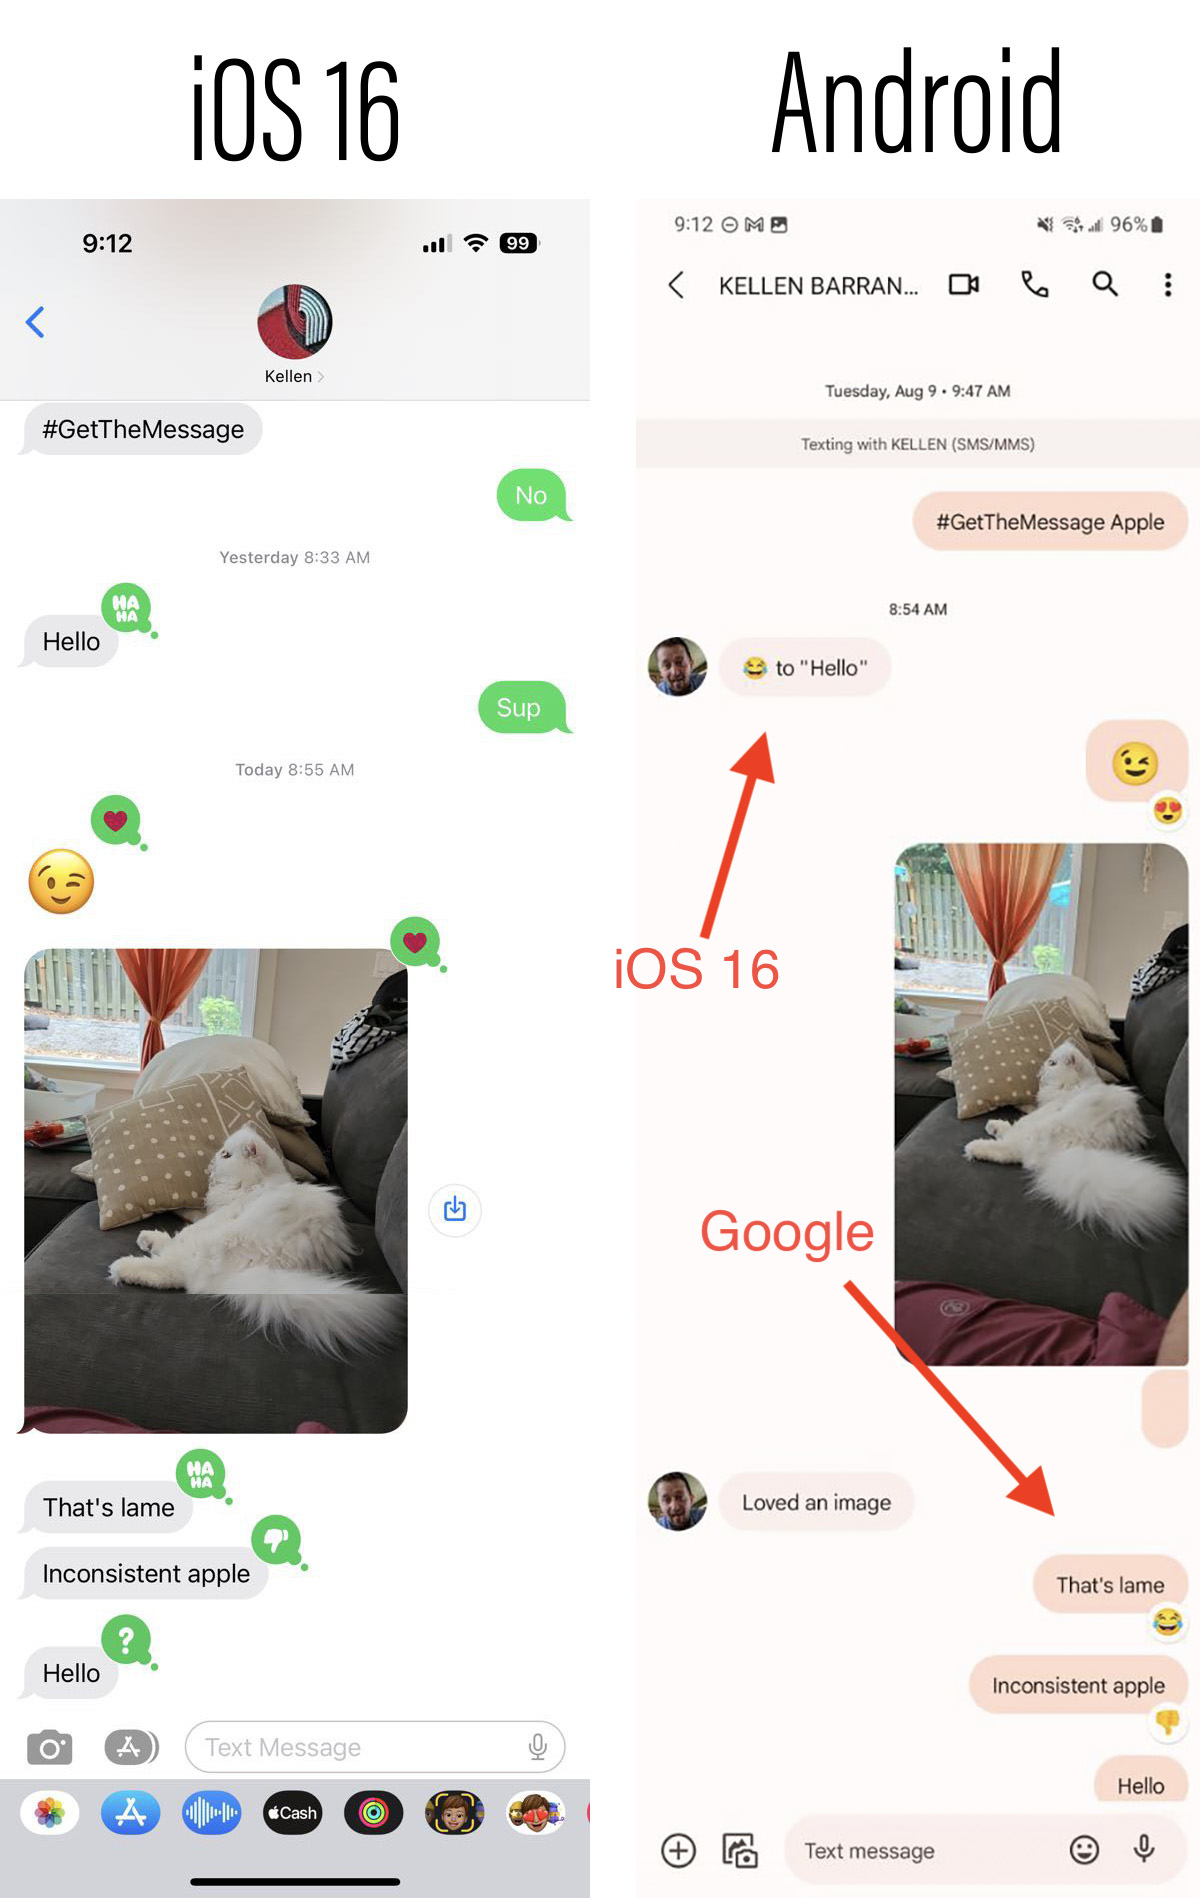 iOS 16 Réactions aux messages Android